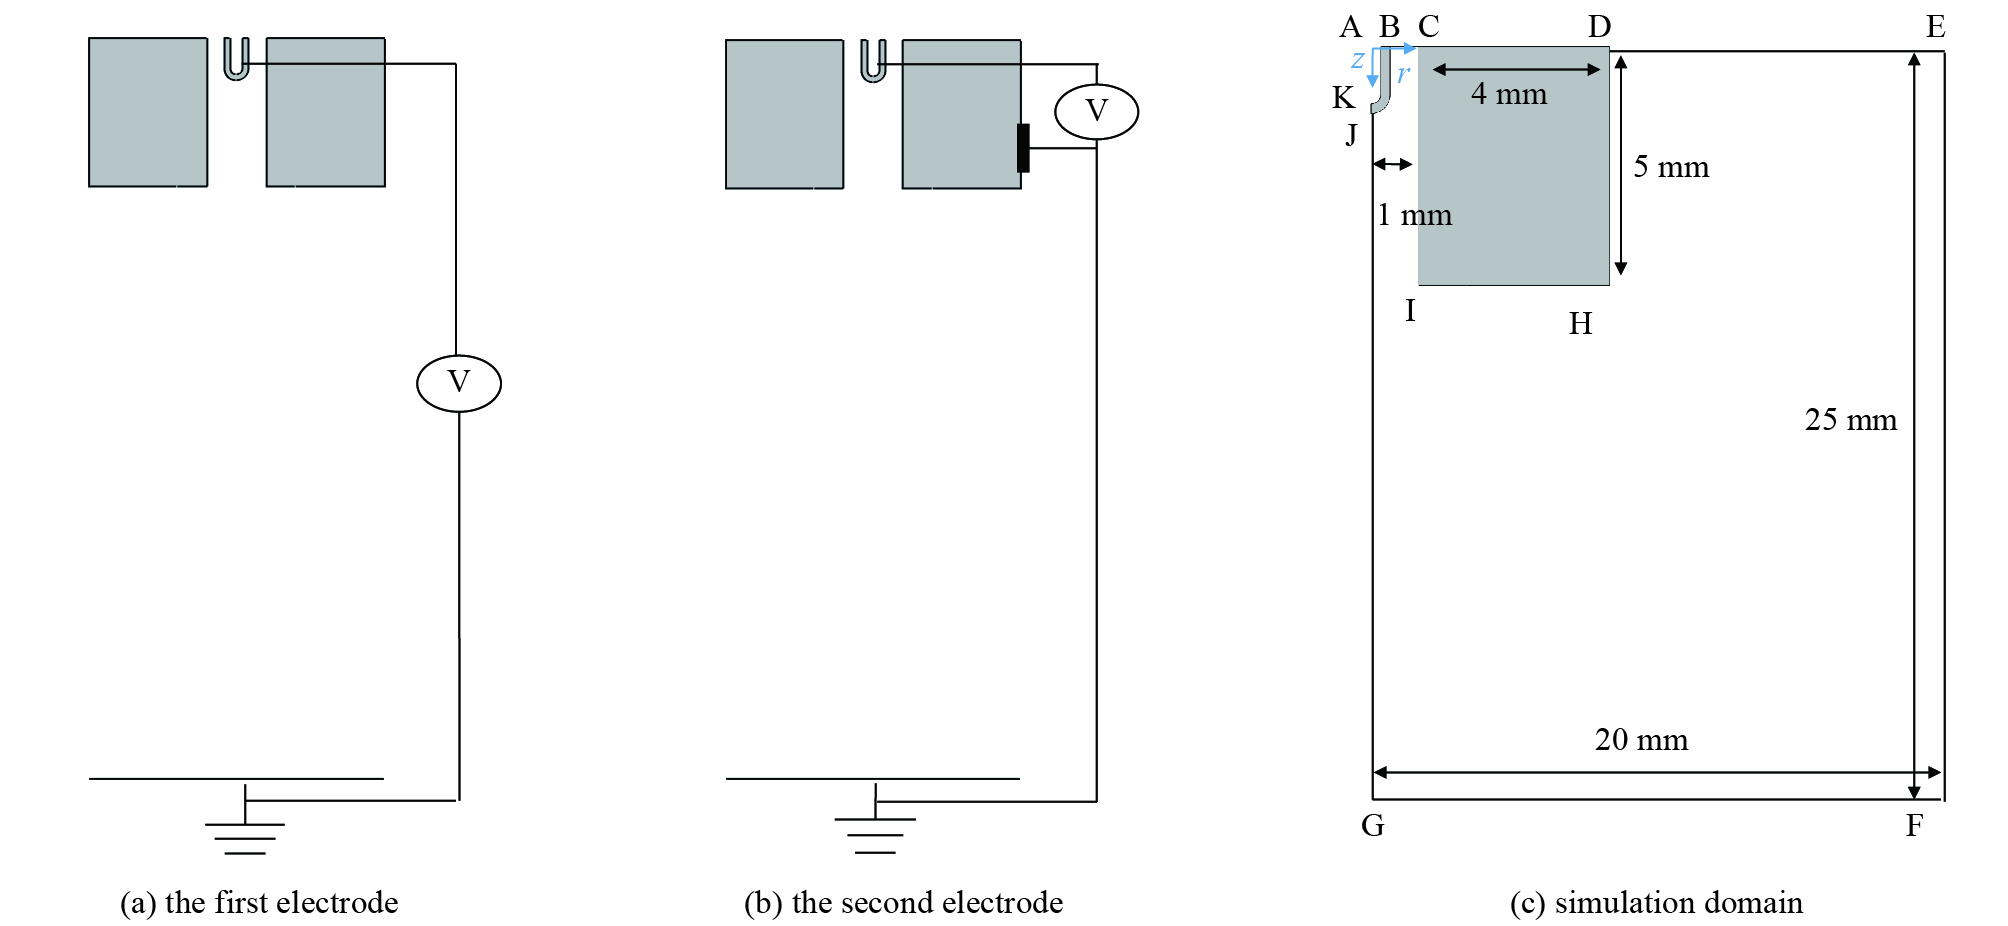 Discharge device and simulation domain used in our calculation